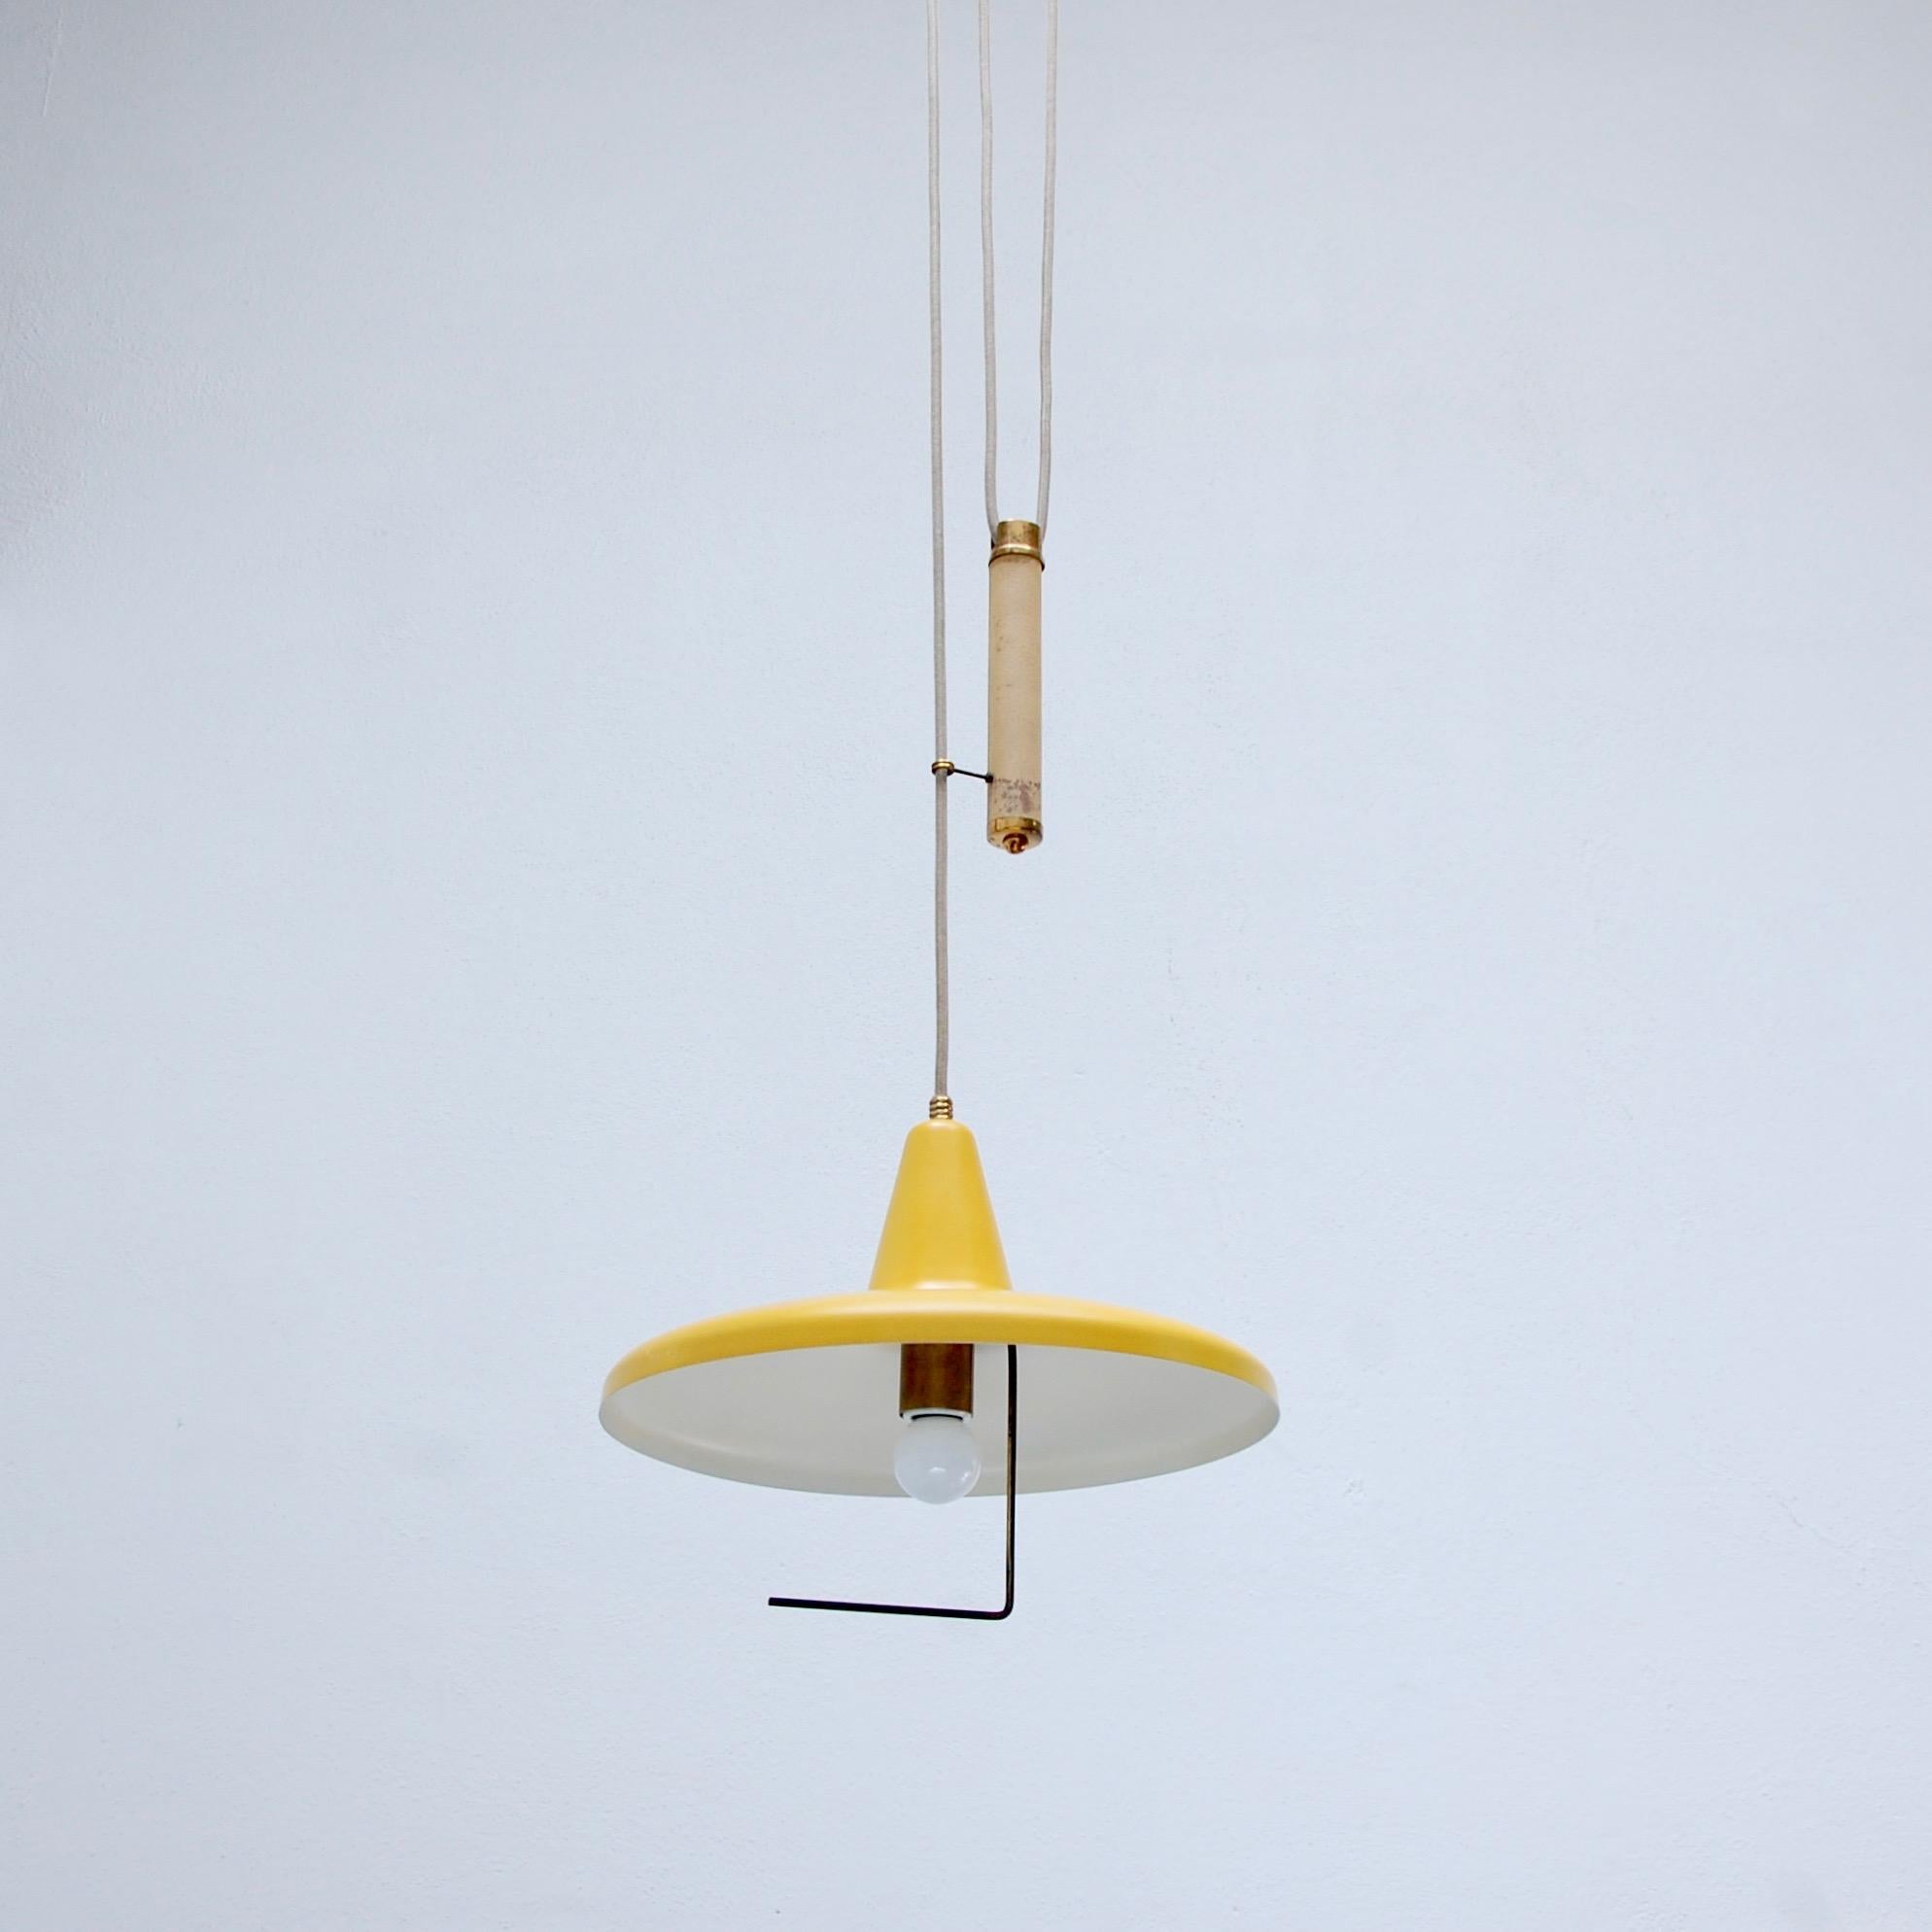 From the period, Italian 1950s pulley pendant in painted yellow aluminum, brass and leather. Original finish, partially restore. Wired with a single E26 medium based socket for the US. Light bulb included. Overall drop